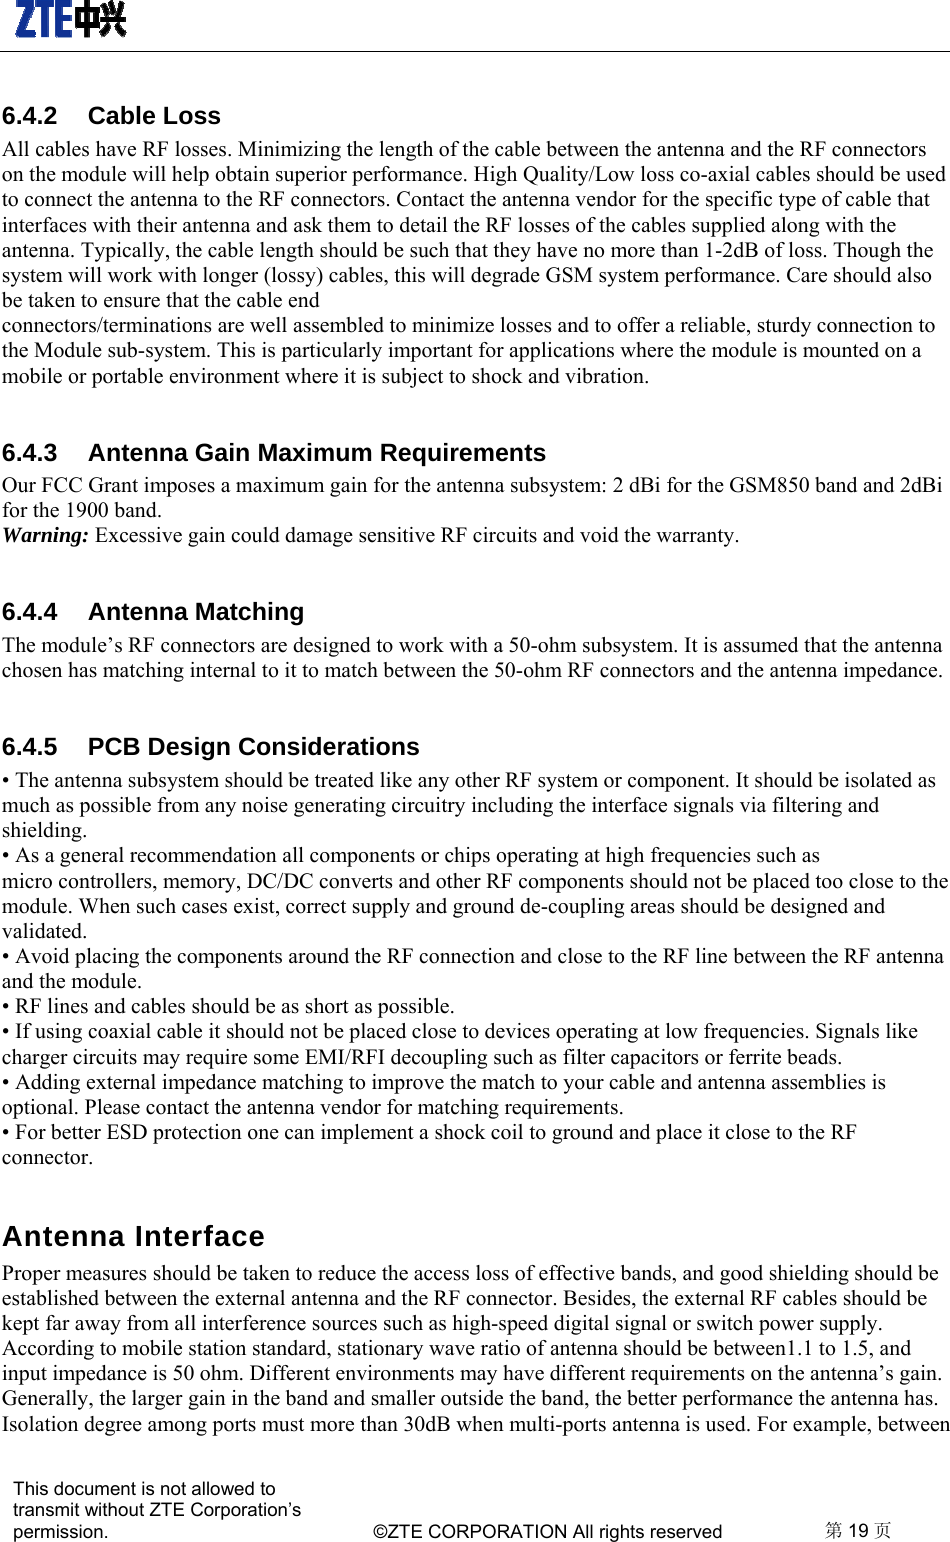   This document is not allowed to transmit without ZTE Corporation’s permission.    ©ZTE CORPORATION All rights reserved  第19 页  6.4.2 Cable Loss All cables have RF losses. Minimizing the length of the cable between the antenna and the RF connectors on the module will help obtain superior performance. High Quality/Low loss co-axial cables should be used to connect the antenna to the RF connectors. Contact the antenna vendor for the specific type of cable that interfaces with their antenna and ask them to detail the RF losses of the cables supplied along with the antenna. Typically, the cable length should be such that they have no more than 1-2dB of loss. Though the system will work with longer (lossy) cables, this will degrade GSM system performance. Care should also be taken to ensure that the cable end connectors/terminations are well assembled to minimize losses and to offer a reliable, sturdy connection to the Module sub-system. This is particularly important for applications where the module is mounted on a mobile or portable environment where it is subject to shock and vibration. 6.4.3  Antenna Gain Maximum Requirements Our FCC Grant imposes a maximum gain for the antenna subsystem: 2 dBi for the GSM850 band and 2dBi for the 1900 band. Warning: Excessive gain could damage sensitive RF circuits and void the warranty. 6.4.4 Antenna Matching The module’s RF connectors are designed to work with a 50-ohm subsystem. It is assumed that the antenna chosen has matching internal to it to match between the 50-ohm RF connectors and the antenna impedance. 6.4.5  PCB Design Considerations • The antenna subsystem should be treated like any other RF system or component. It should be isolated as much as possible from any noise generating circuitry including the interface signals via filtering and shielding. • As a general recommendation all components or chips operating at high frequencies such as micro controllers, memory, DC/DC converts and other RF components should not be placed too close to the module. When such cases exist, correct supply and ground de-coupling areas should be designed and validated. • Avoid placing the components around the RF connection and close to the RF line between the RF antenna and the module. • RF lines and cables should be as short as possible. • If using coaxial cable it should not be placed close to devices operating at low frequencies. Signals like charger circuits may require some EMI/RFI decoupling such as filter capacitors or ferrite beads. • Adding external impedance matching to improve the match to your cable and antenna assemblies is optional. Please contact the antenna vendor for matching requirements. • For better ESD protection one can implement a shock coil to ground and place it close to the RF connector. Antenna Interface   Proper measures should be taken to reduce the access loss of effective bands, and good shielding should be established between the external antenna and the RF connector. Besides, the external RF cables should be kept far away from all interference sources such as high-speed digital signal or switch power supply.   According to mobile station standard, stationary wave ratio of antenna should be between1.1 to 1.5, and input impedance is 50 ohm. Different environments may have different requirements on the antenna’s gain. Generally, the larger gain in the band and smaller outside the band, the better performance the antenna has. Isolation degree among ports must more than 30dB when multi-ports antenna is used. For example, between 